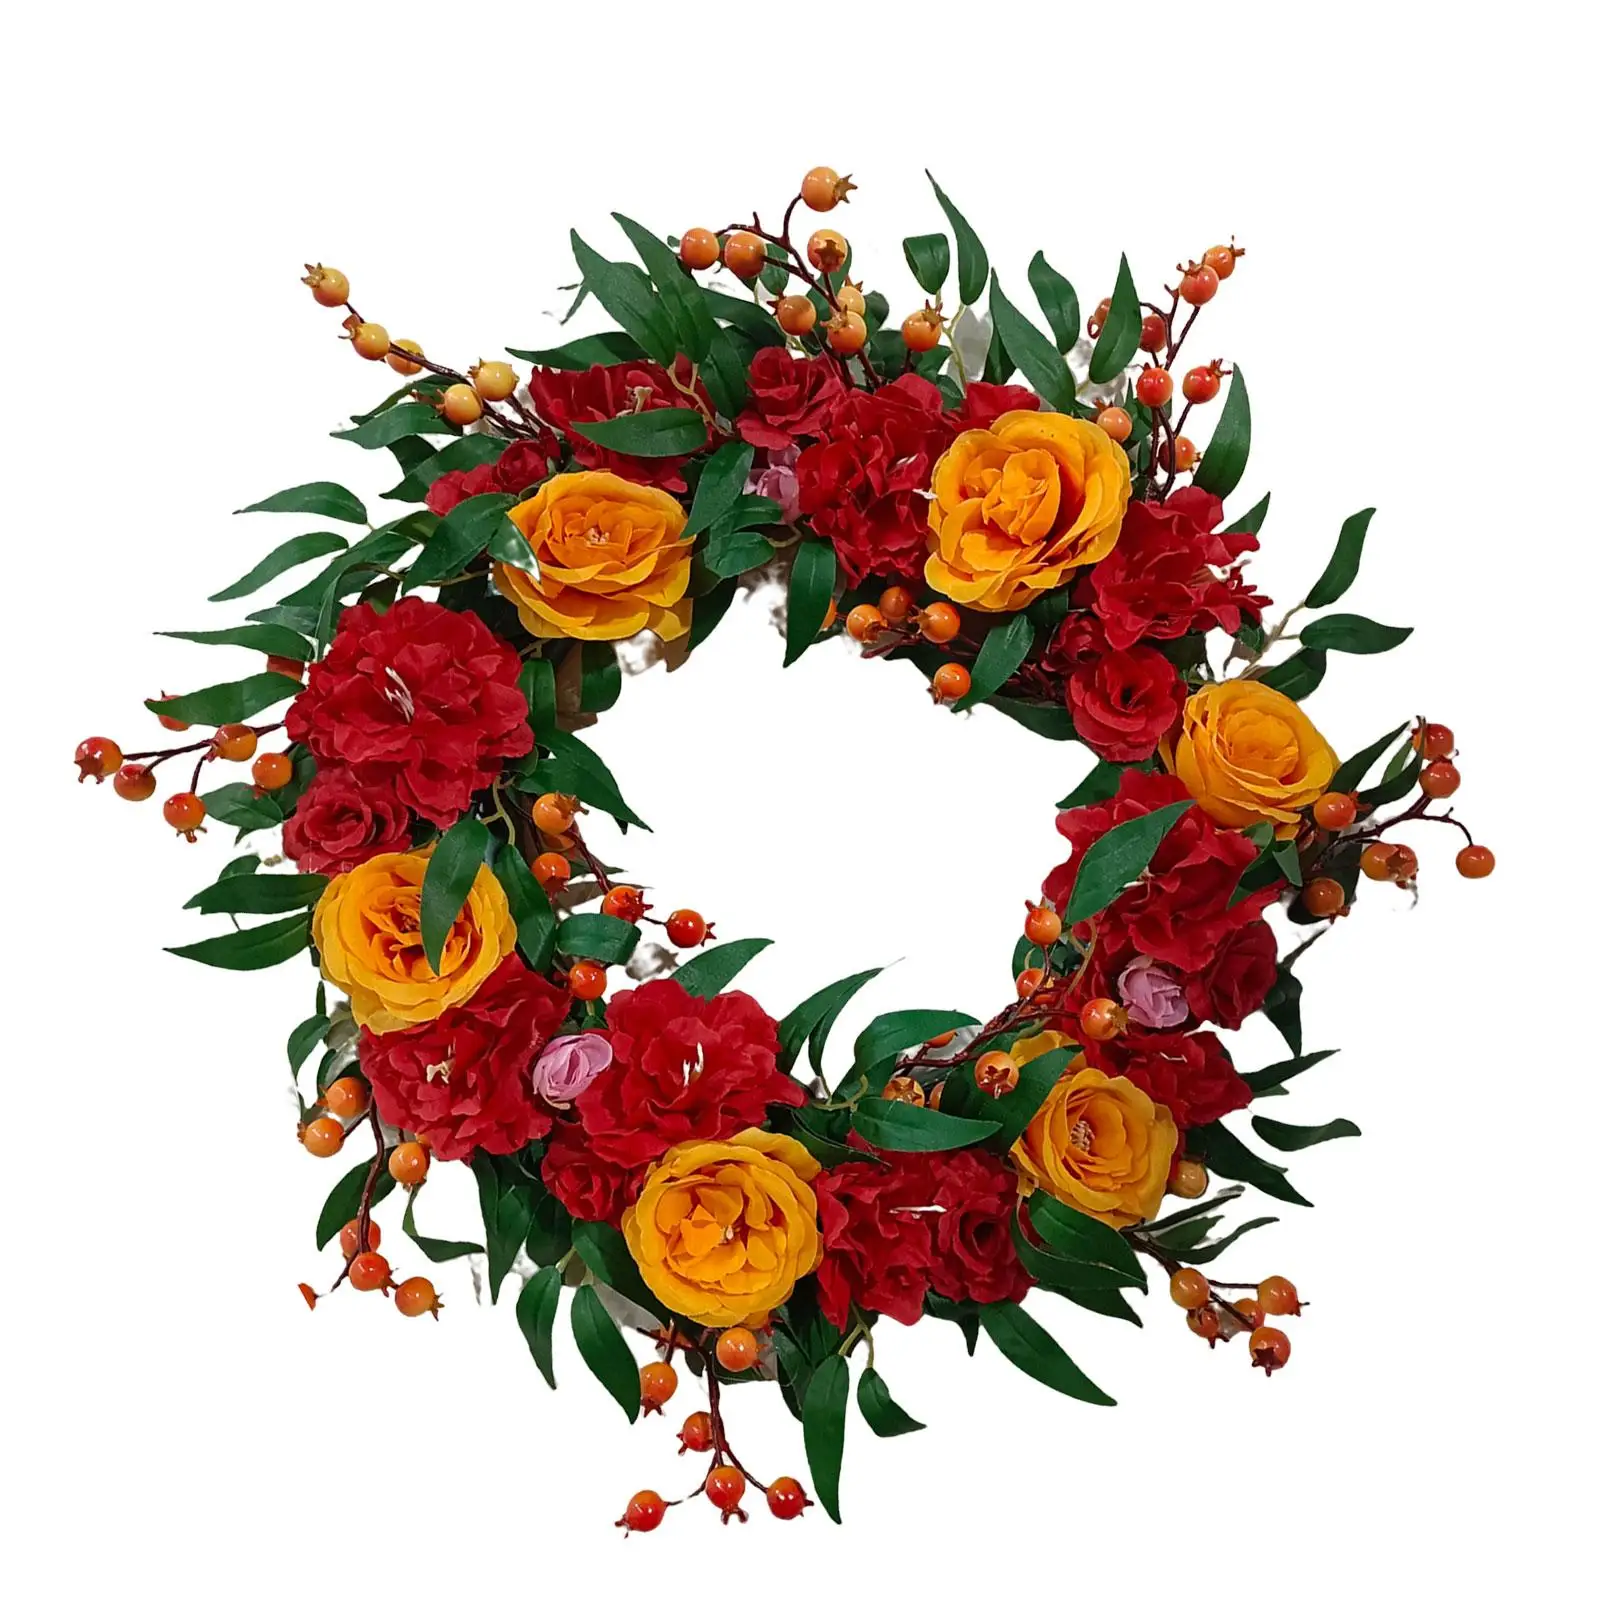 Round Artificial Flower Wreath Greenery Outdoor Front Door Large Garland Home Festival Decor Ornament